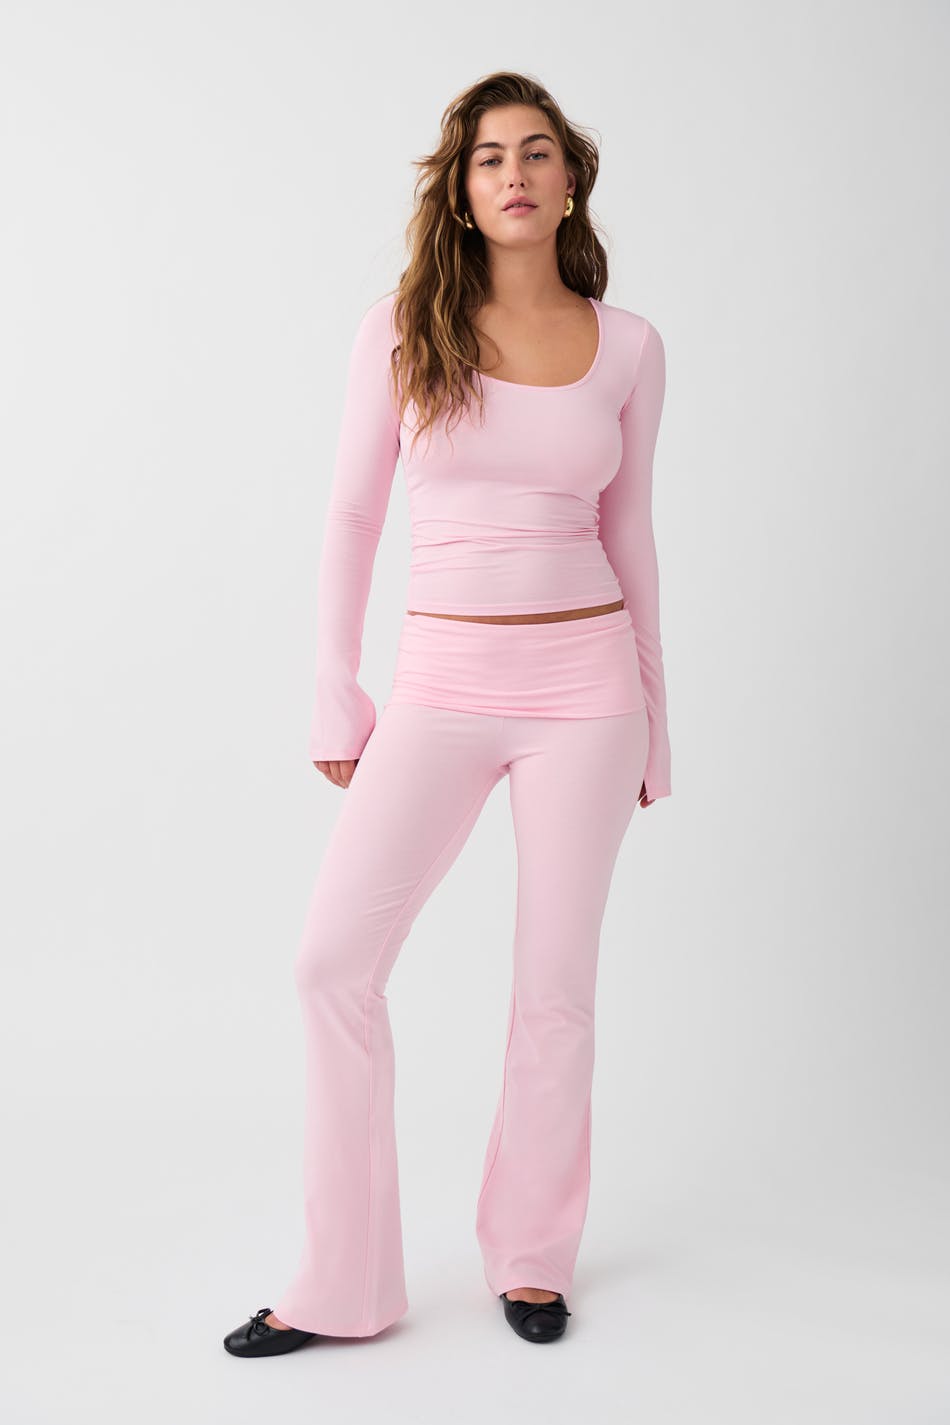 Gina Tricot - Soft touch folded flare trousers - yoga-pants - Pink - L - Female